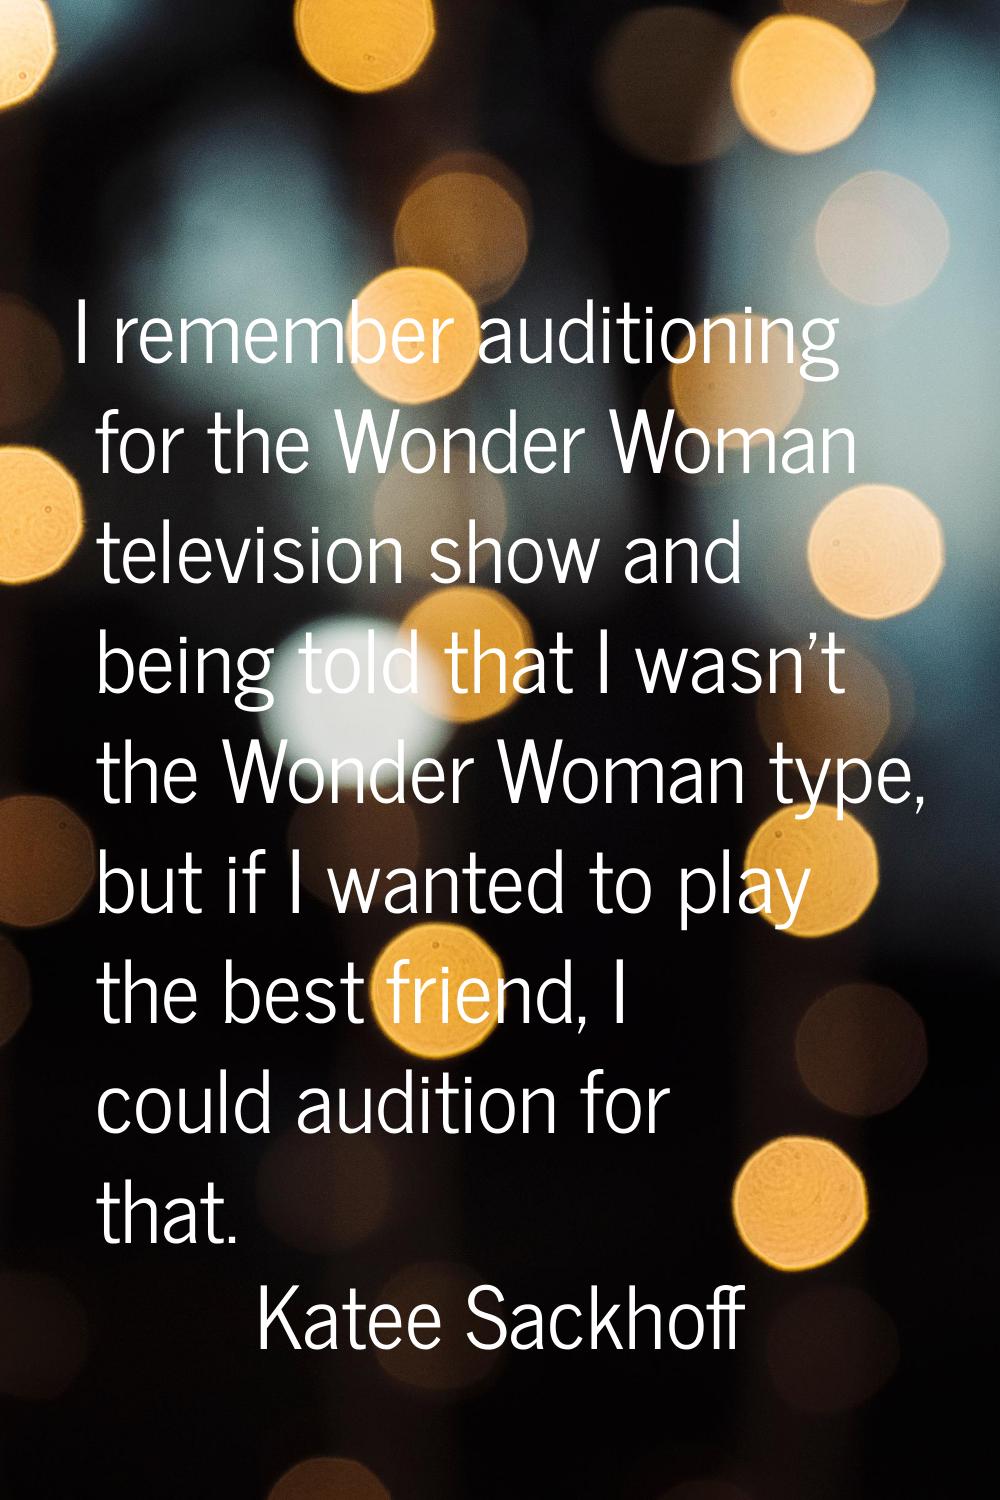 I remember auditioning for the Wonder Woman television show and being told that I wasn't the Wonder